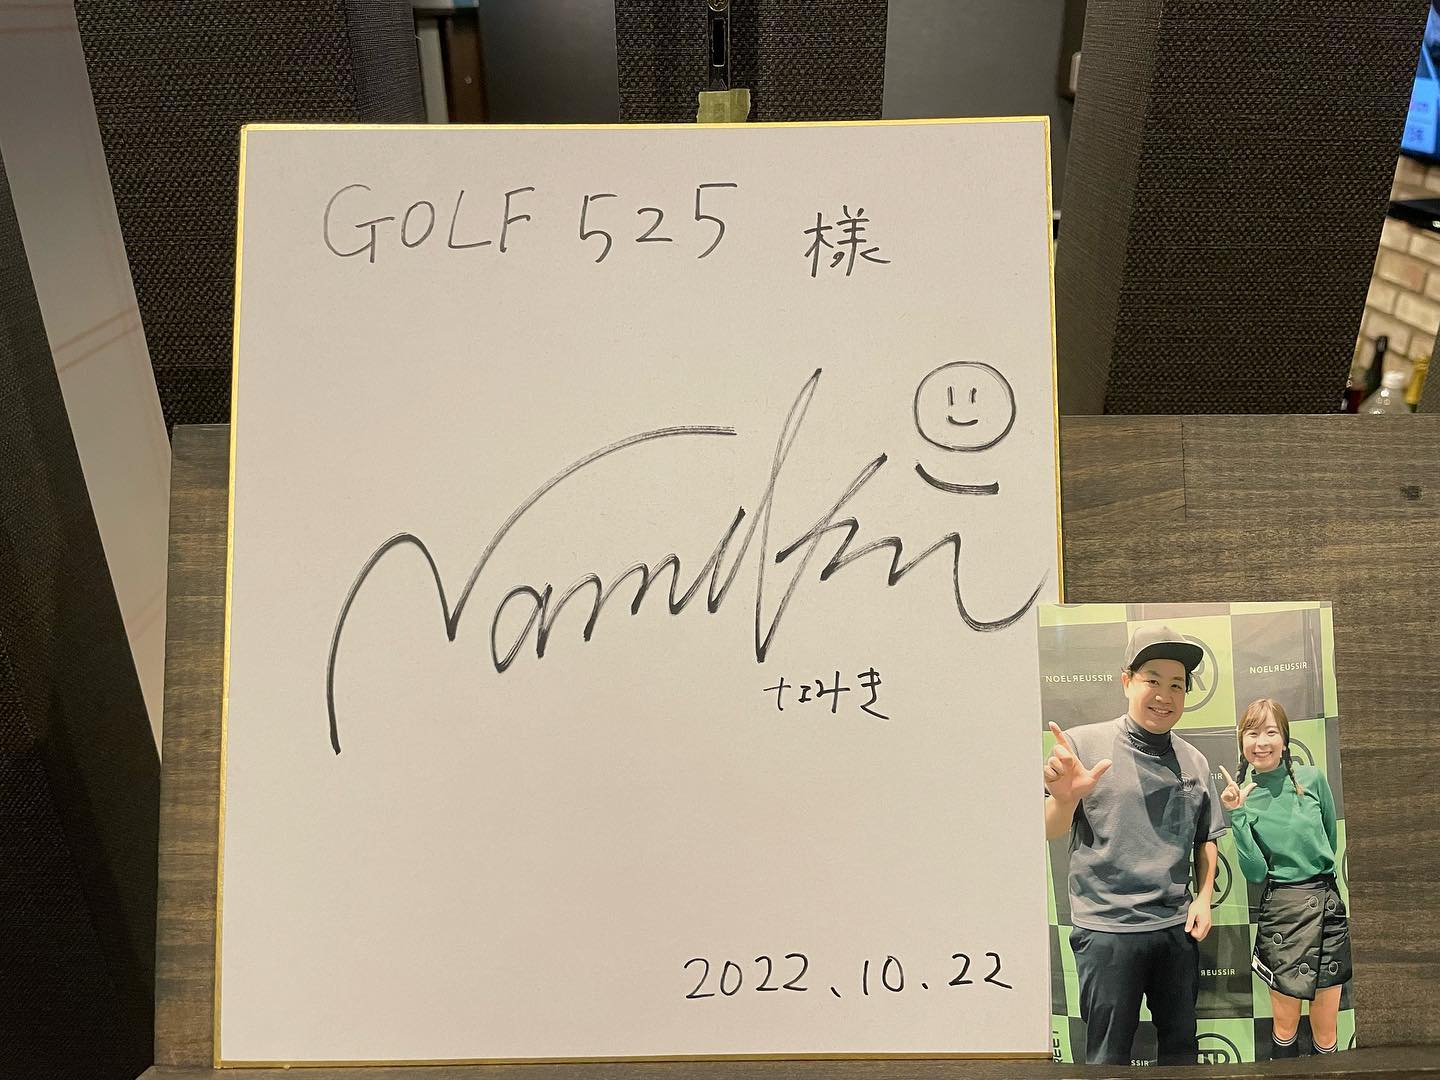 GOLF525の宝物紹介①- from Instagram